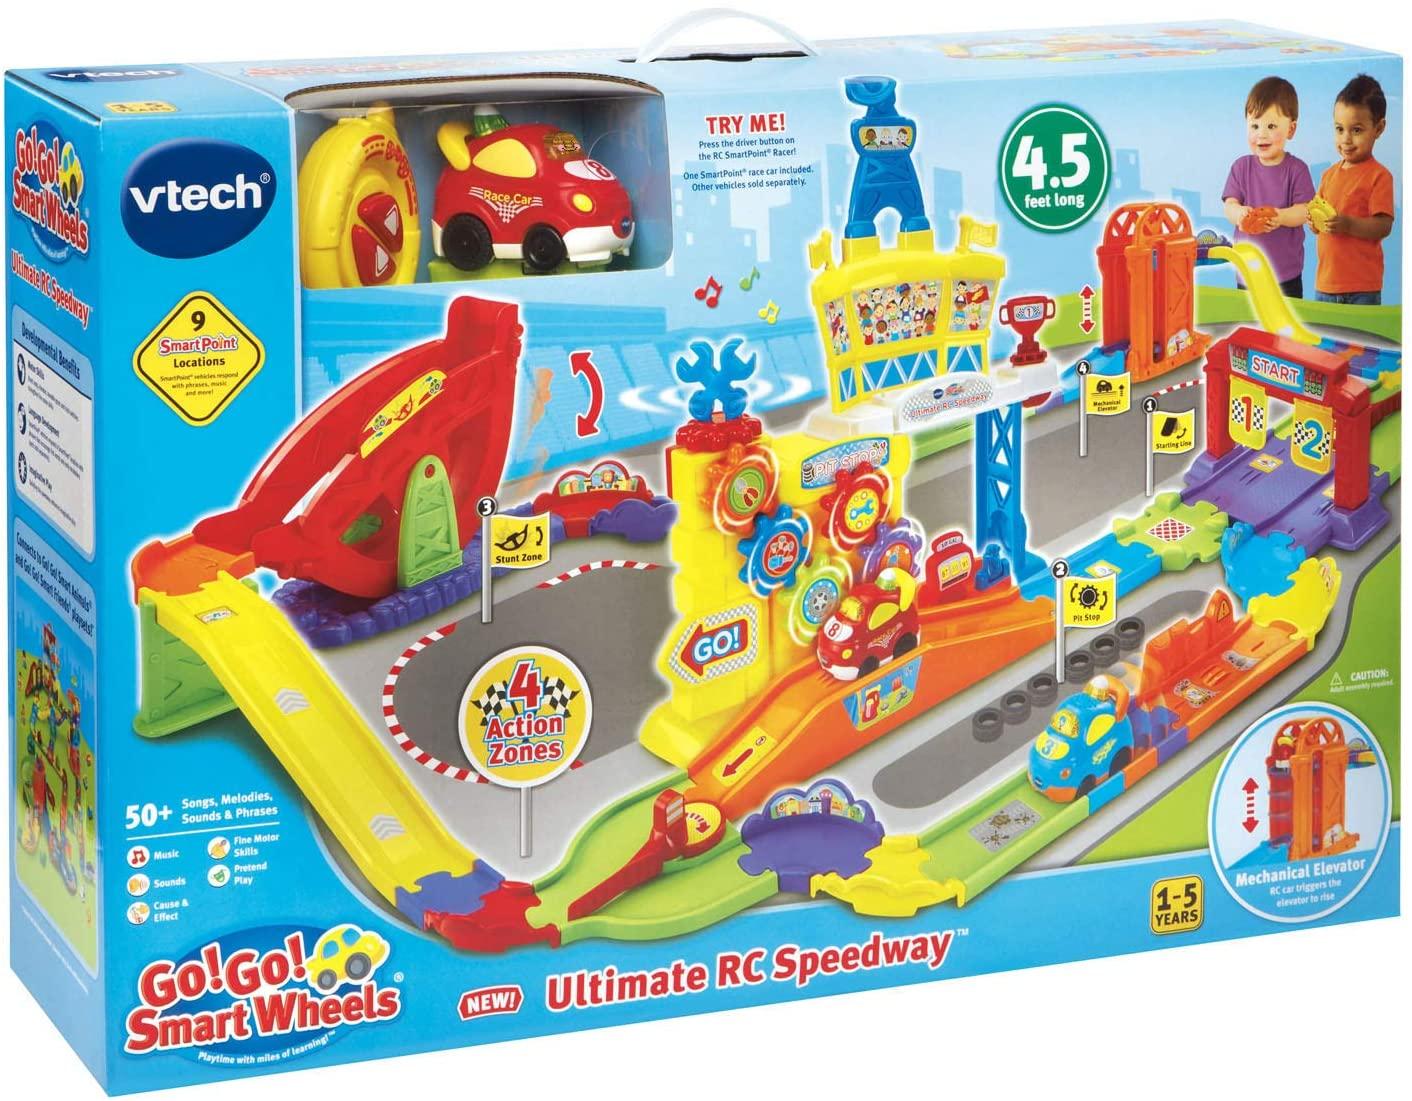 Smart Wheels Ultimate RC Speedway Toy for sale online VTech Toys Go 